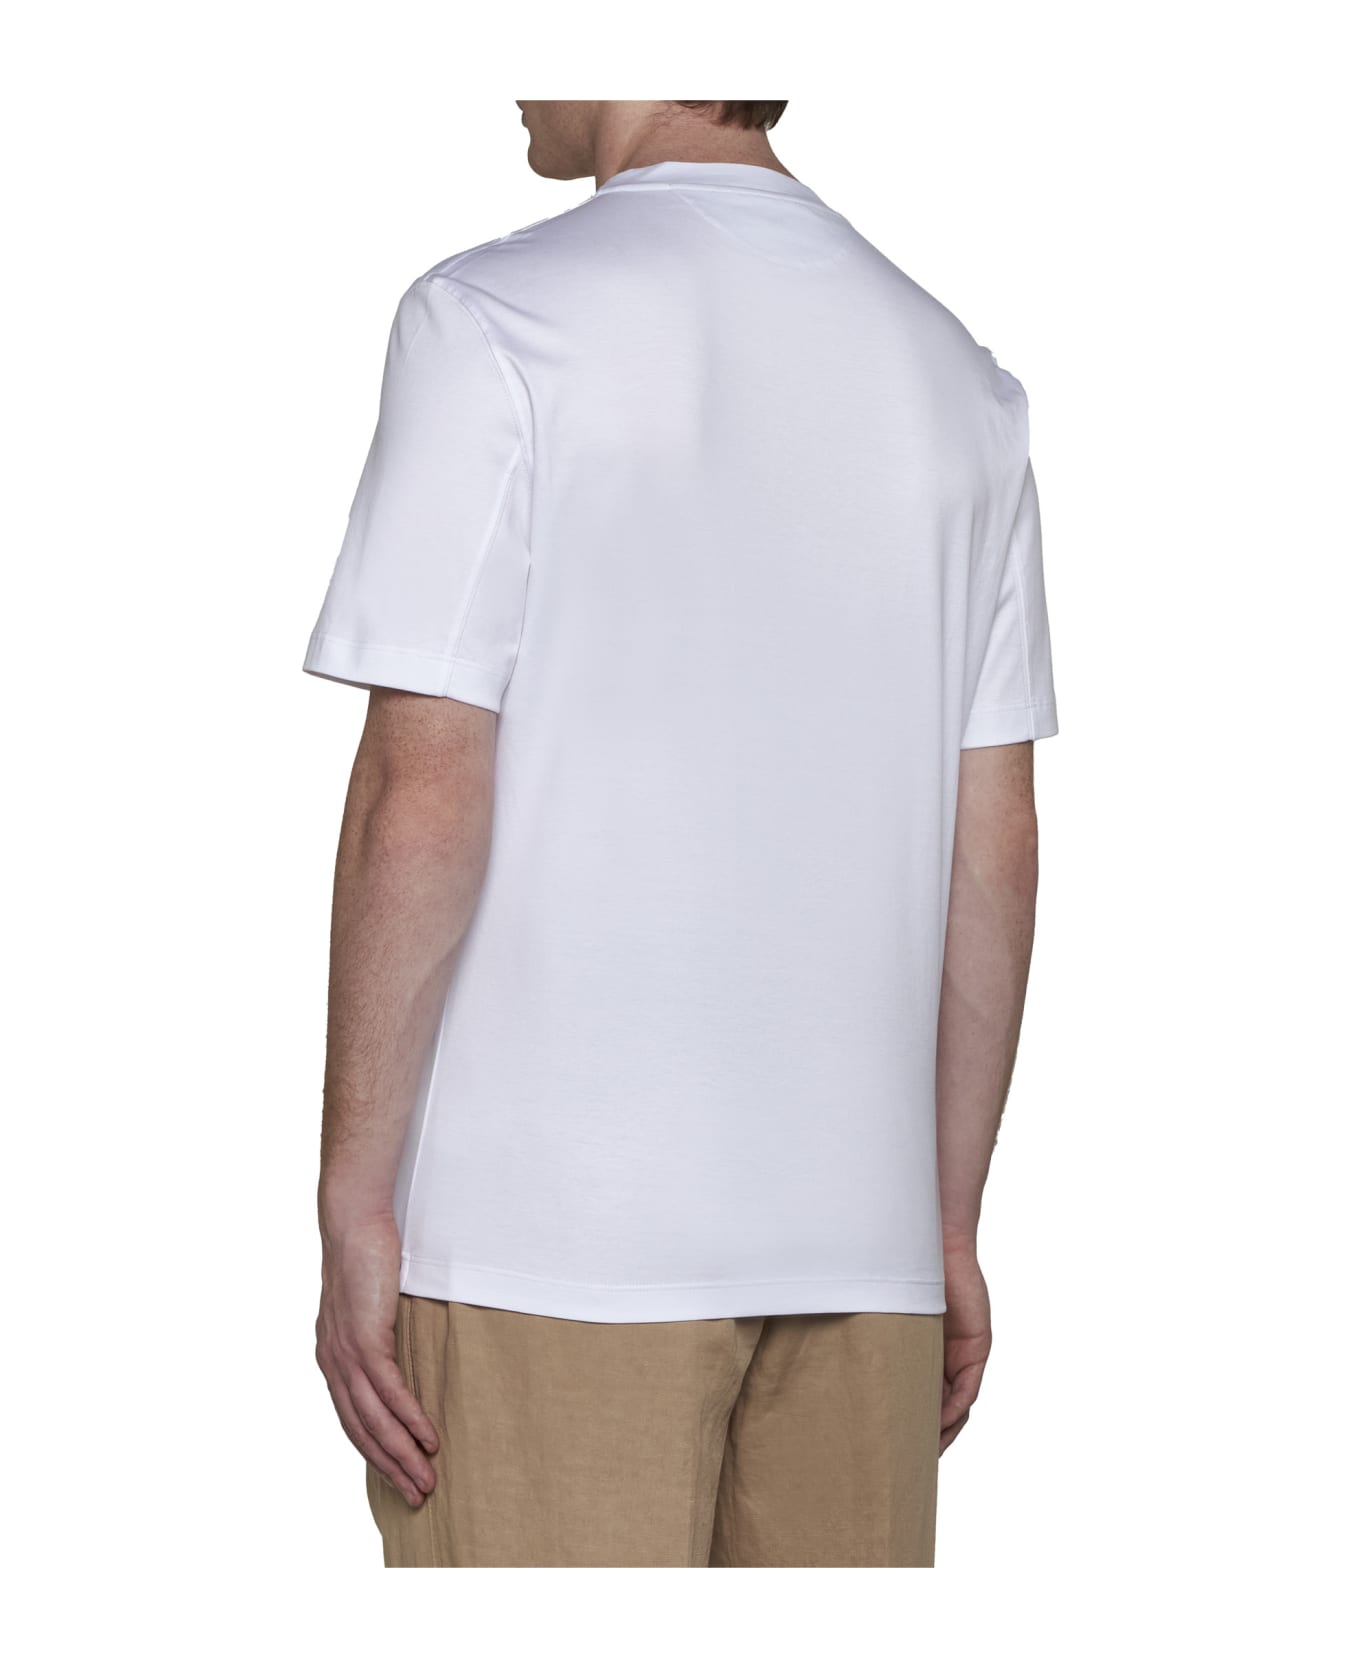 Brunello Cucinelli Crew-neck Basic Fit Cotton Jersey T-shirt With Print - White シャツ